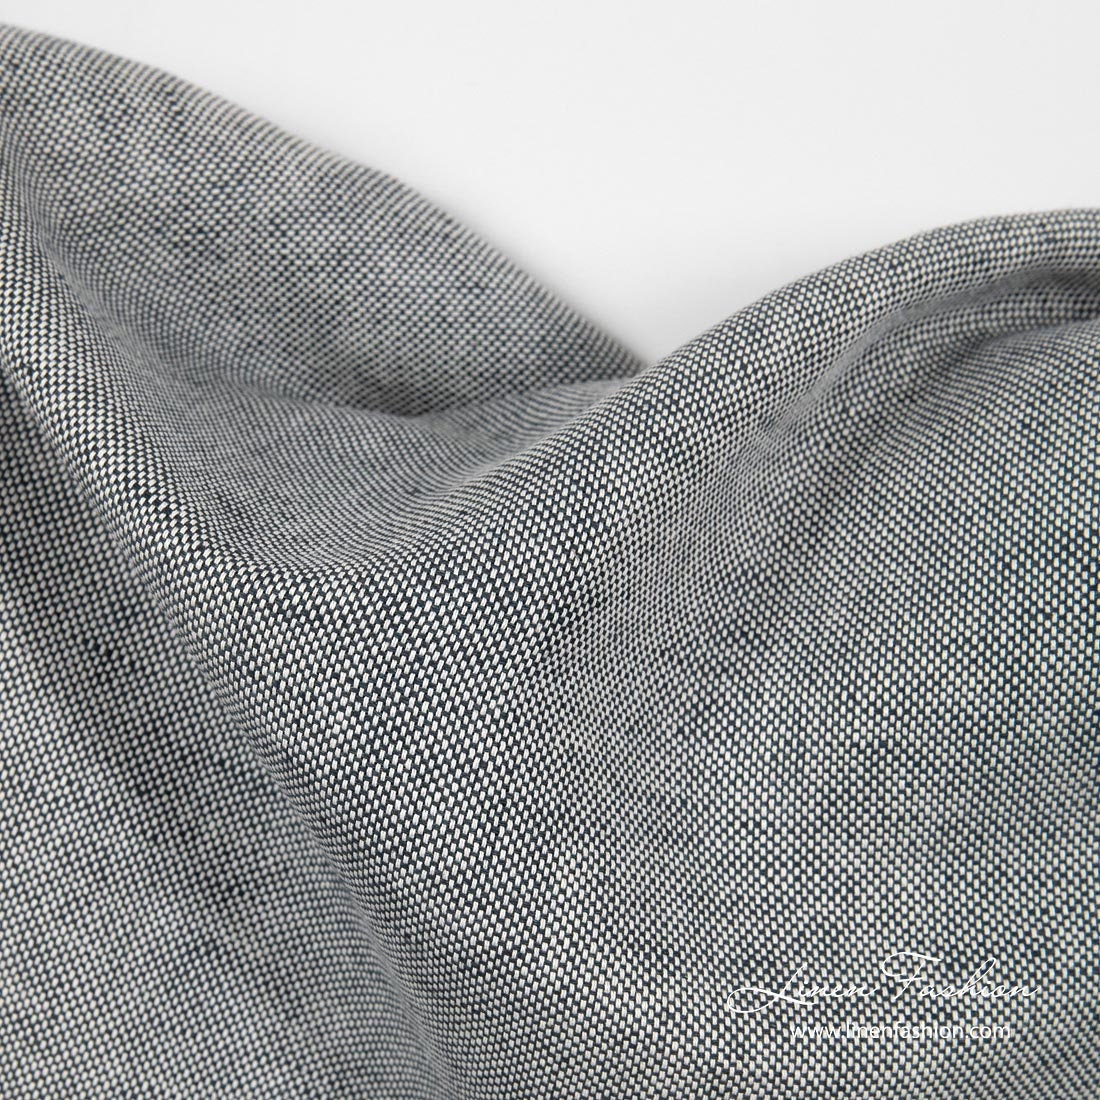 Linen Blend Fabric in Dark Blue, Melange | Width 150cm Weight 210Gsm Fabrics By The Yard Or Meter Ab Siulas, Lithuania